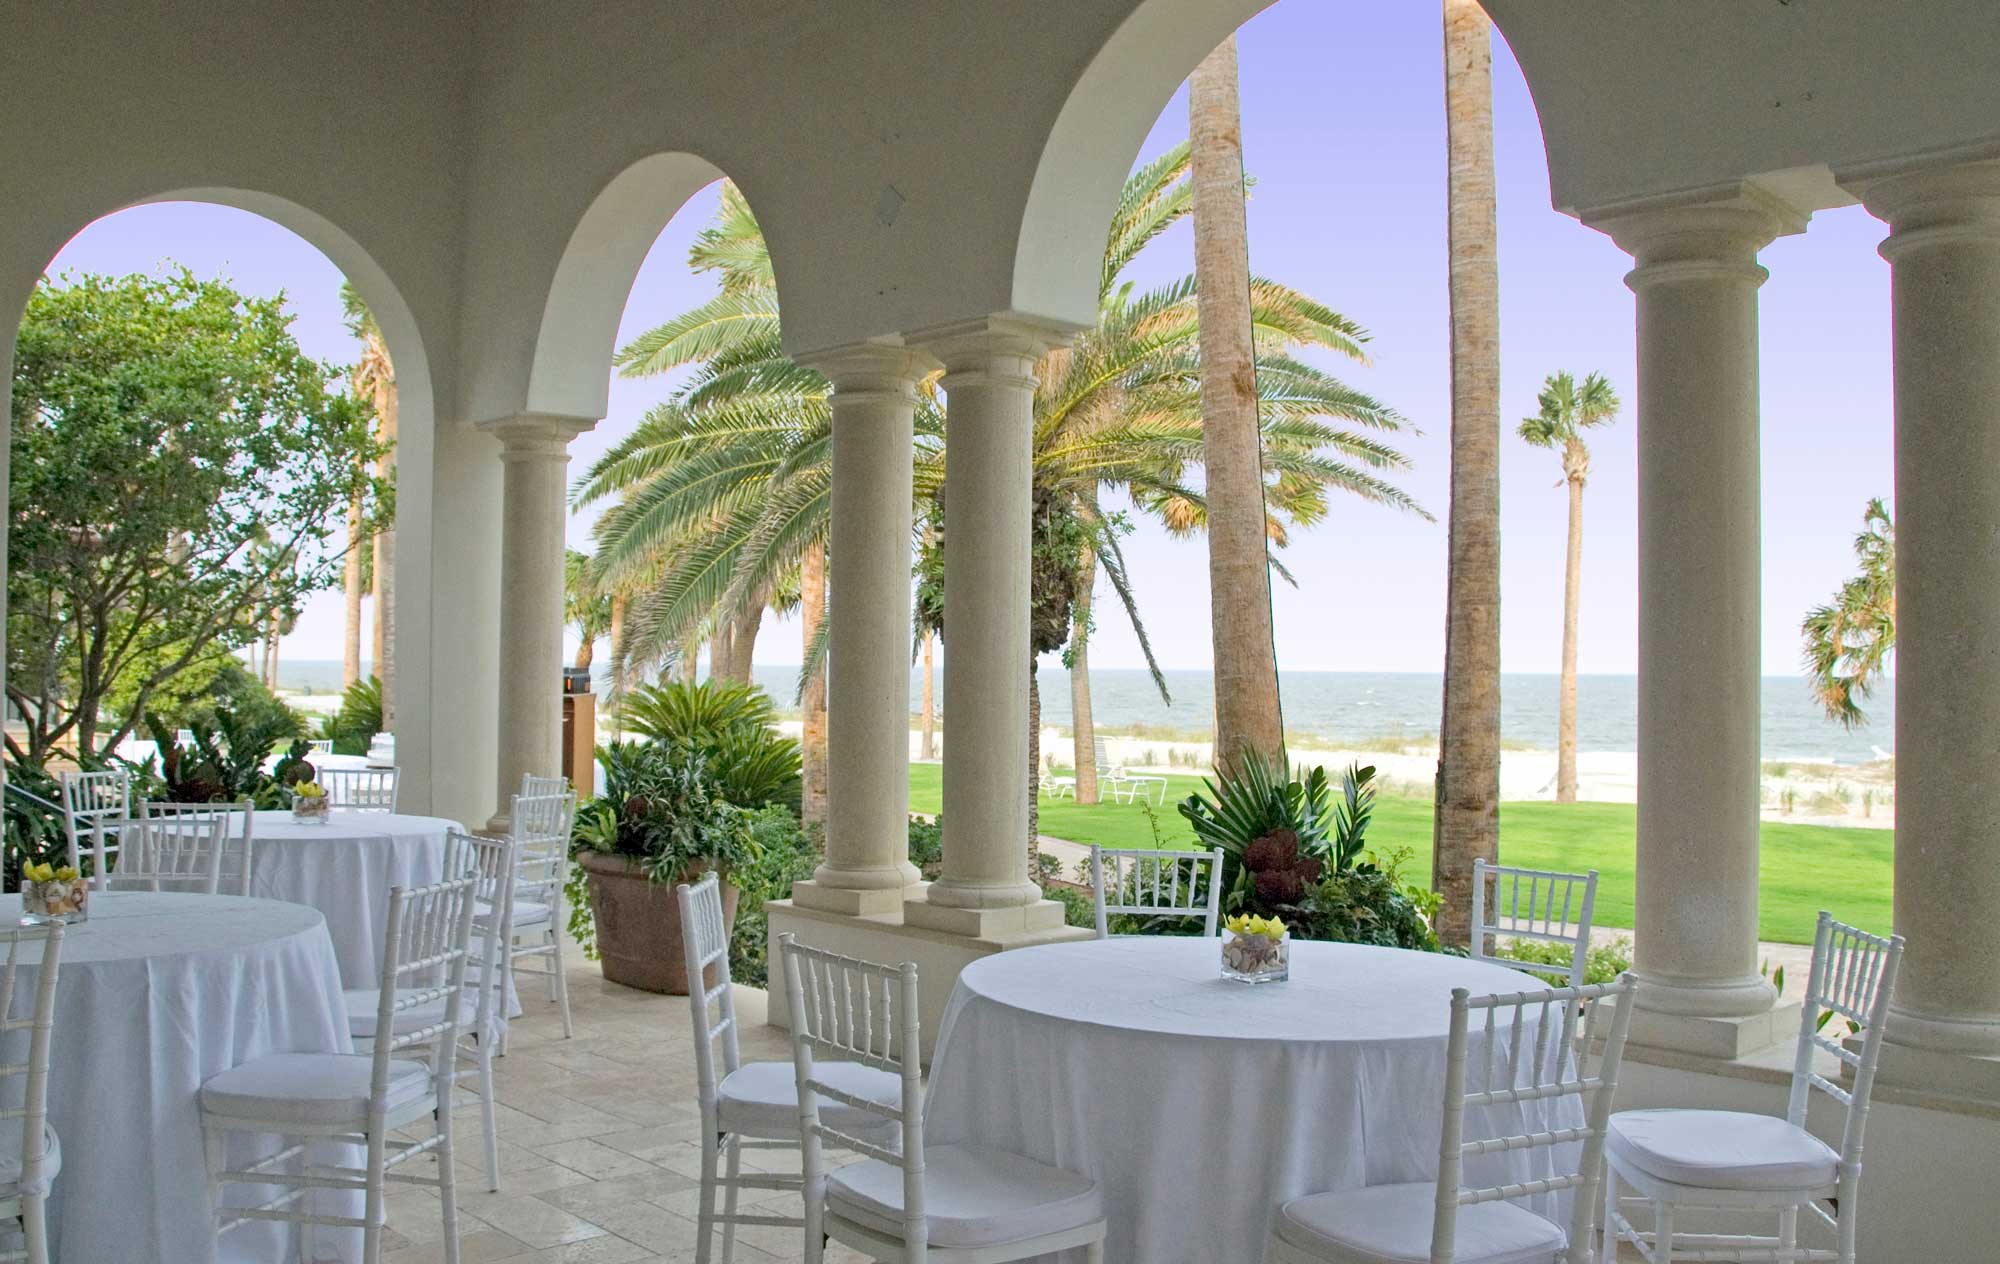 10 Wedding Venues with Private Beaches | Beach Wedding Locations | Best Places for a Beach Wedding | Sea Island